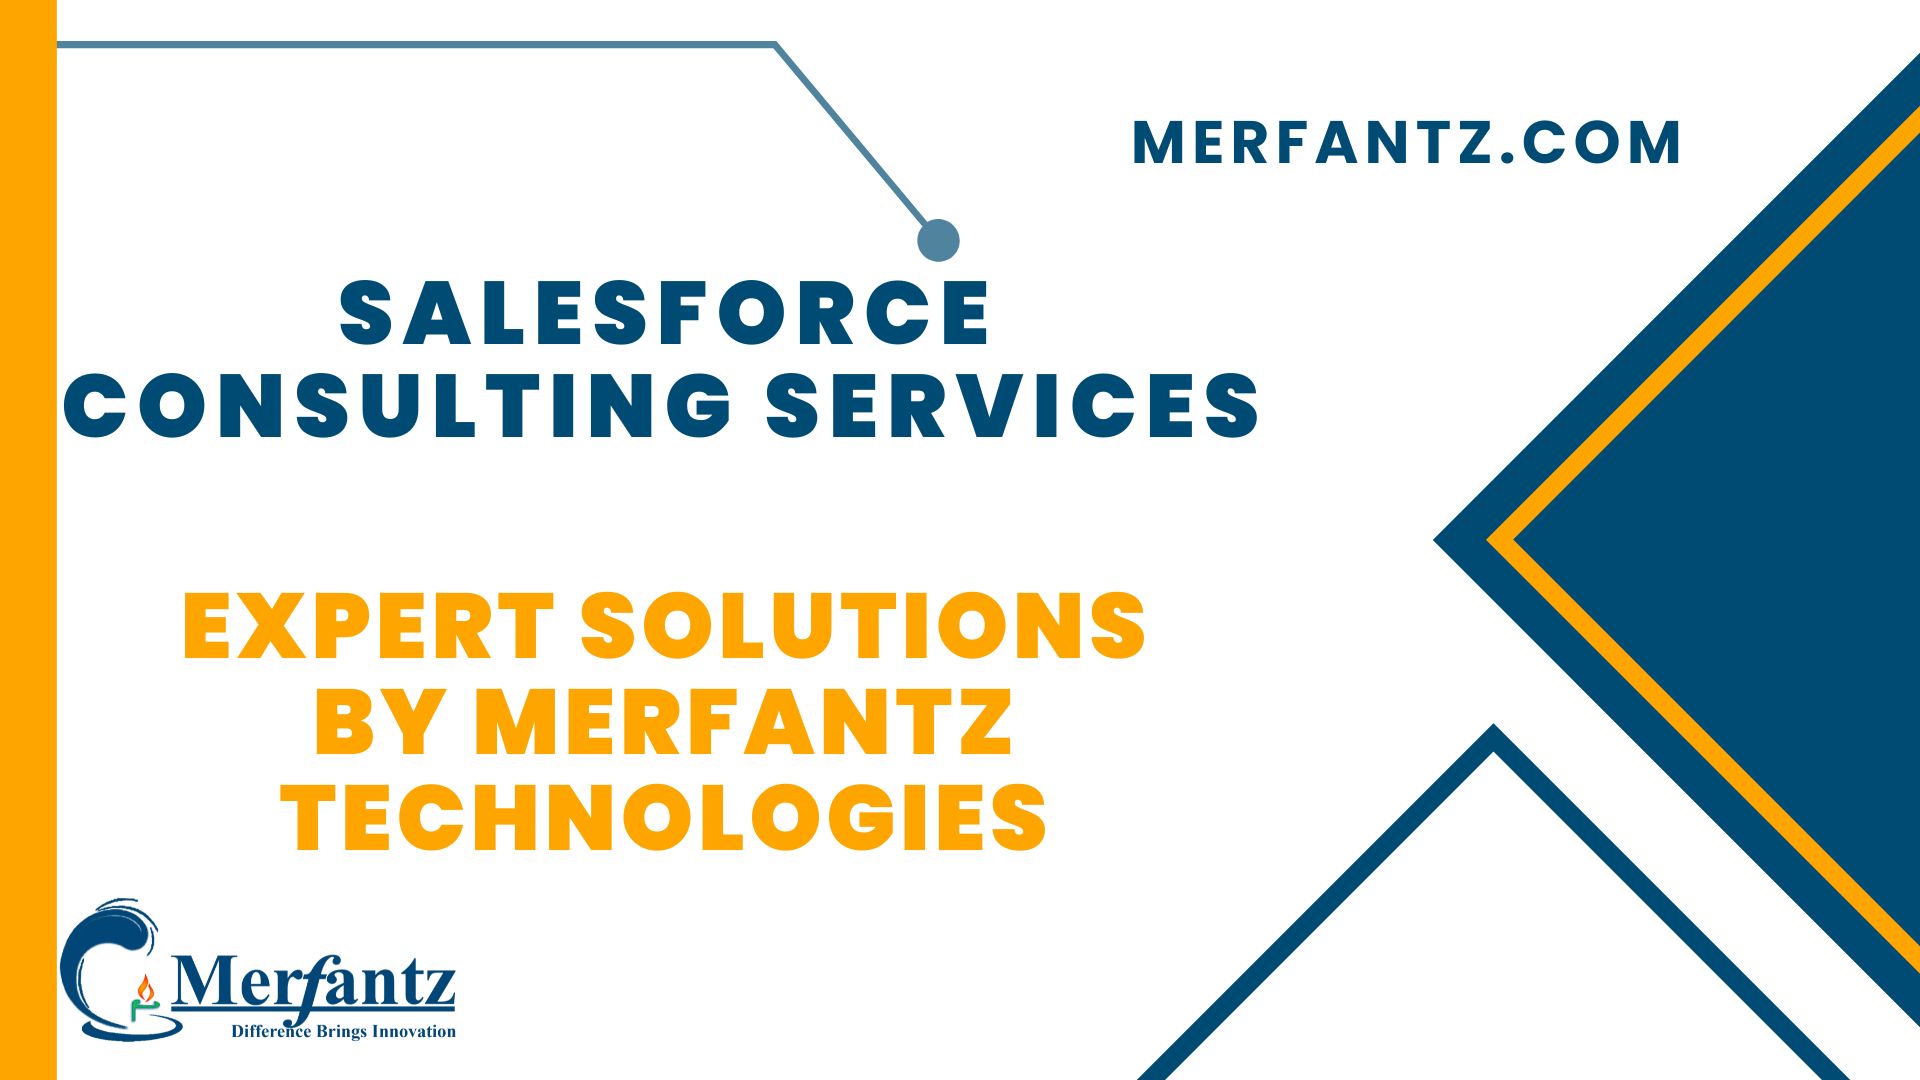 Salesforce Consulting Services - Expert Solutions by Merfantz Technologies